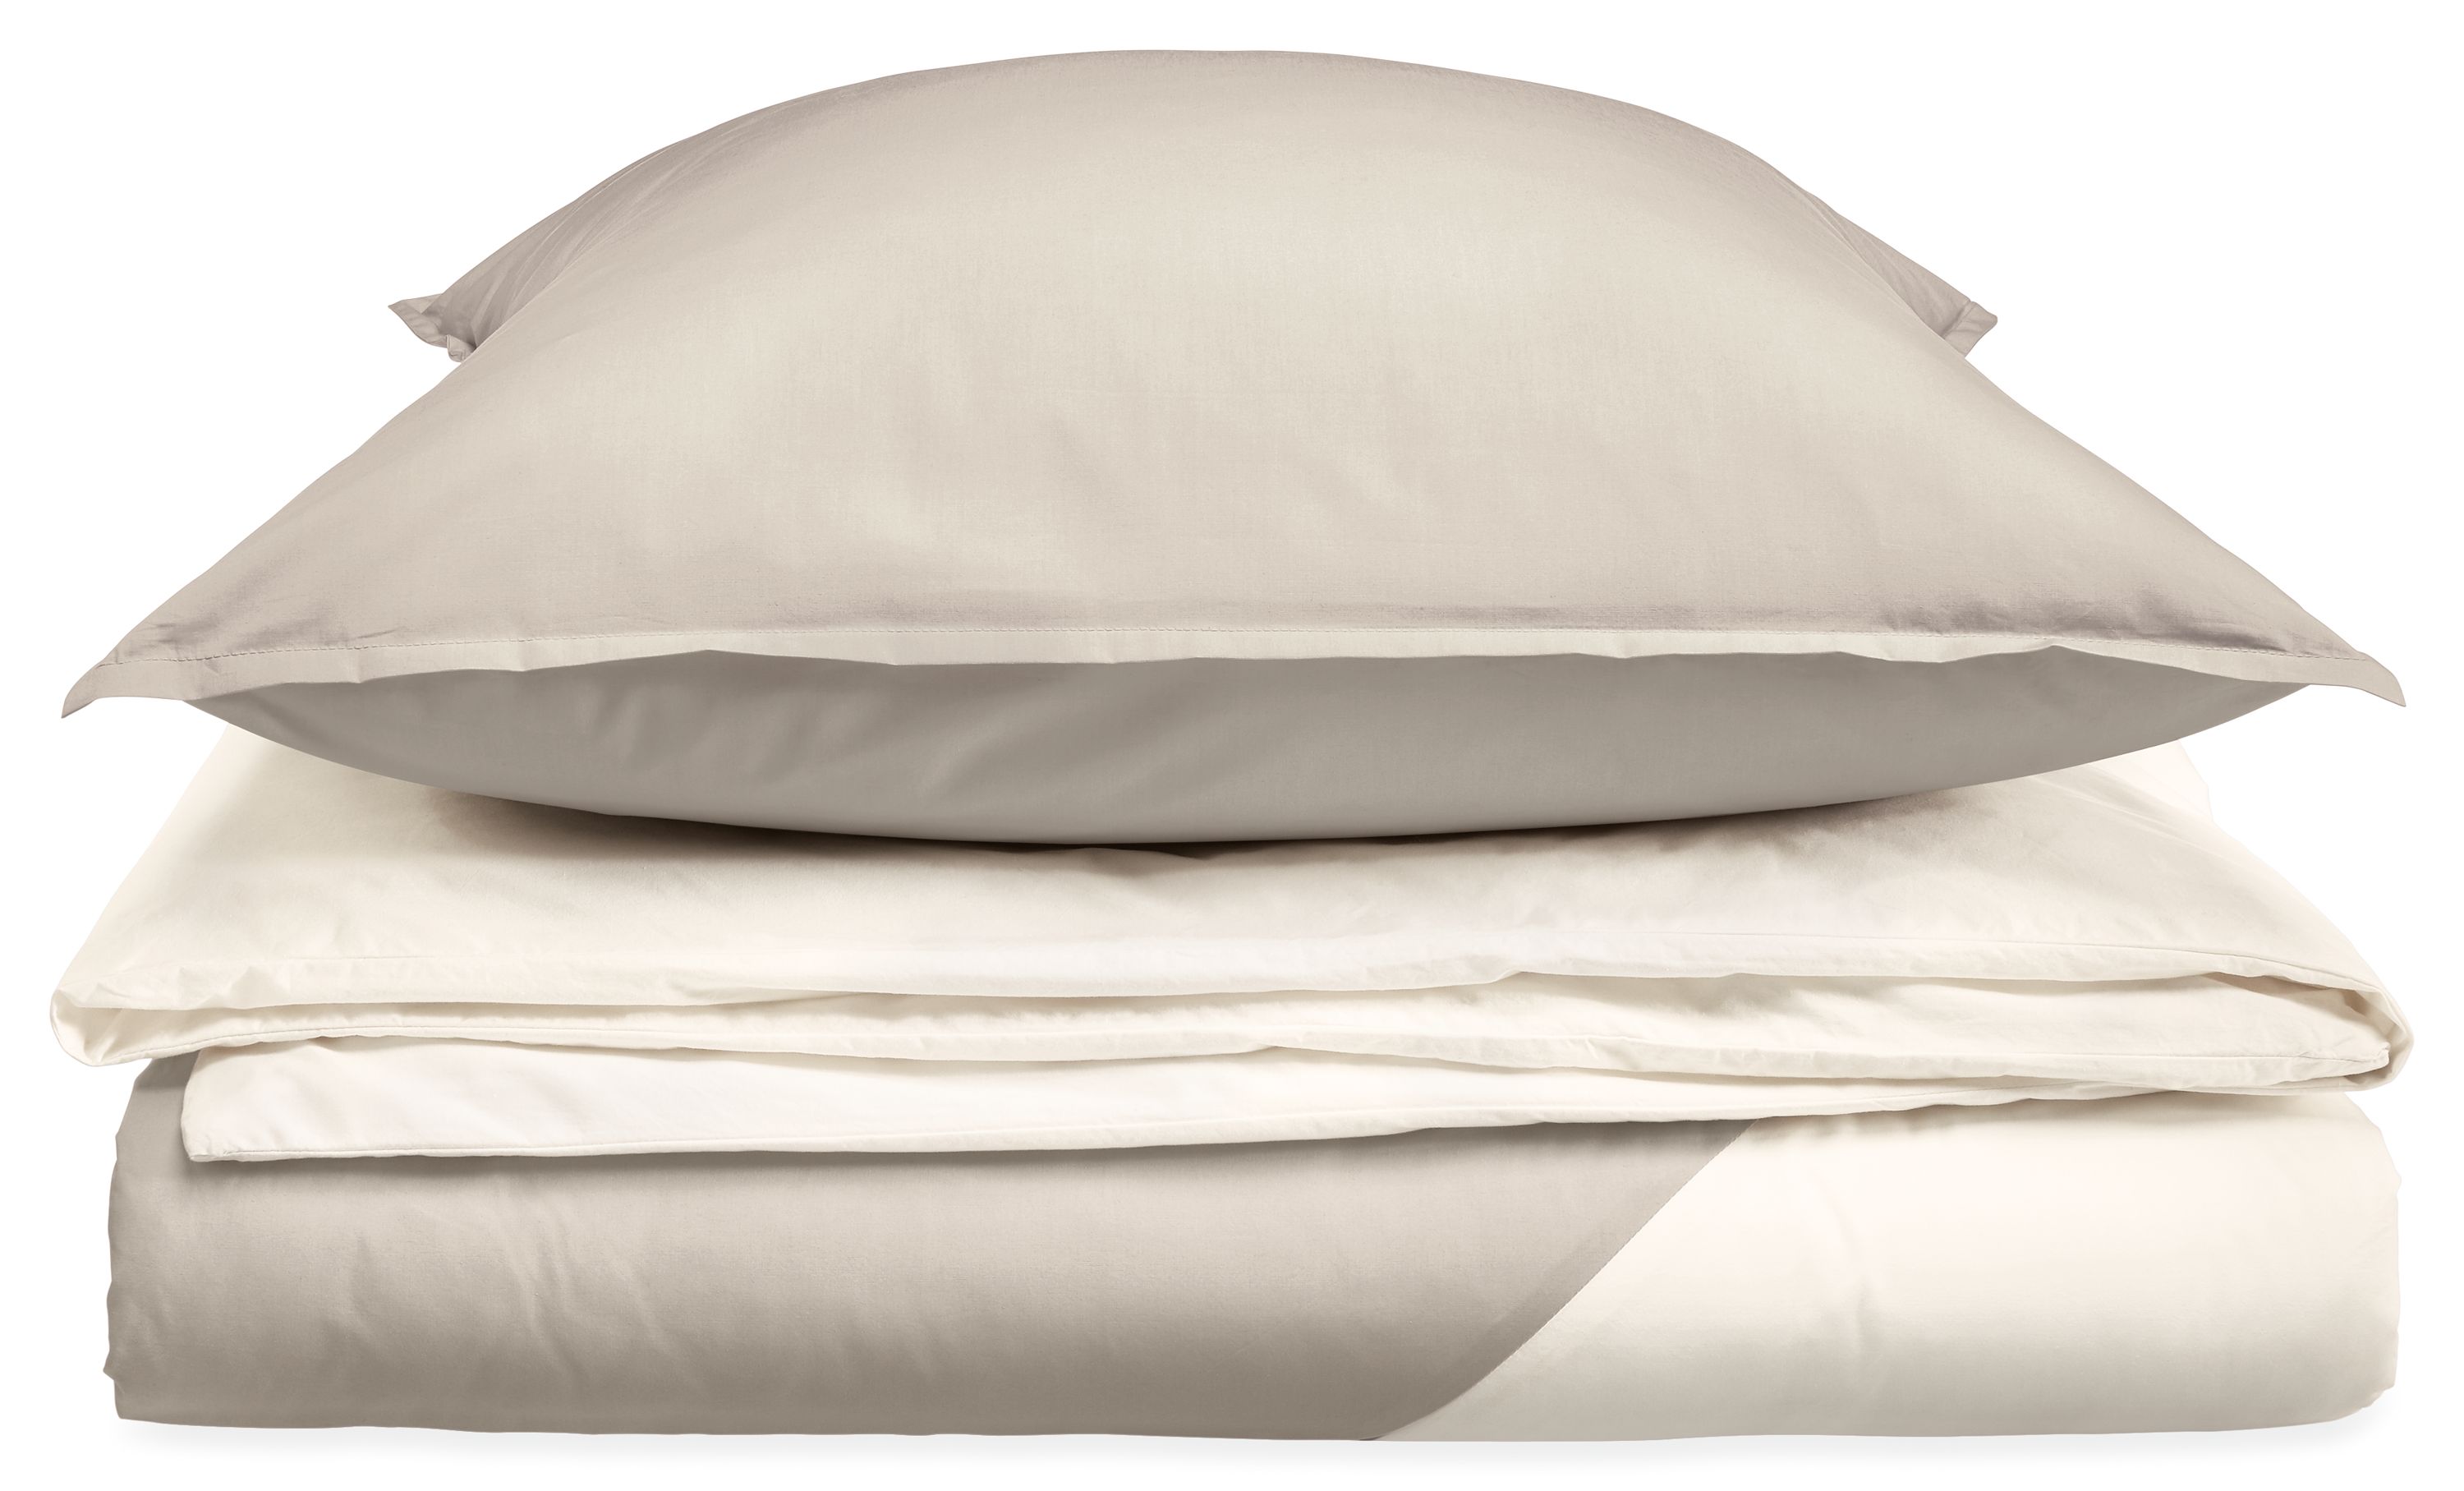 Crossway Percale King Duvet Cover In Grey White Duvet Covers